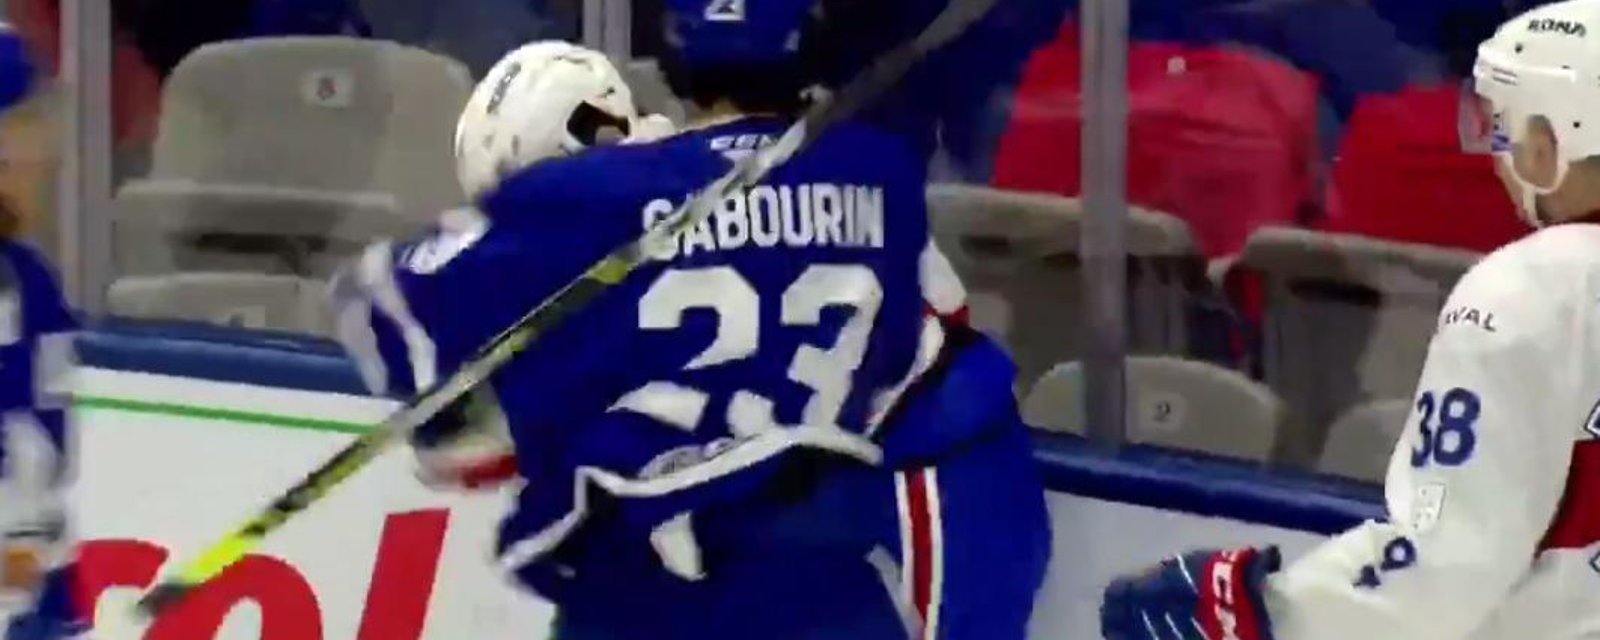 Scott Sabourin suspended for AHL rampage.